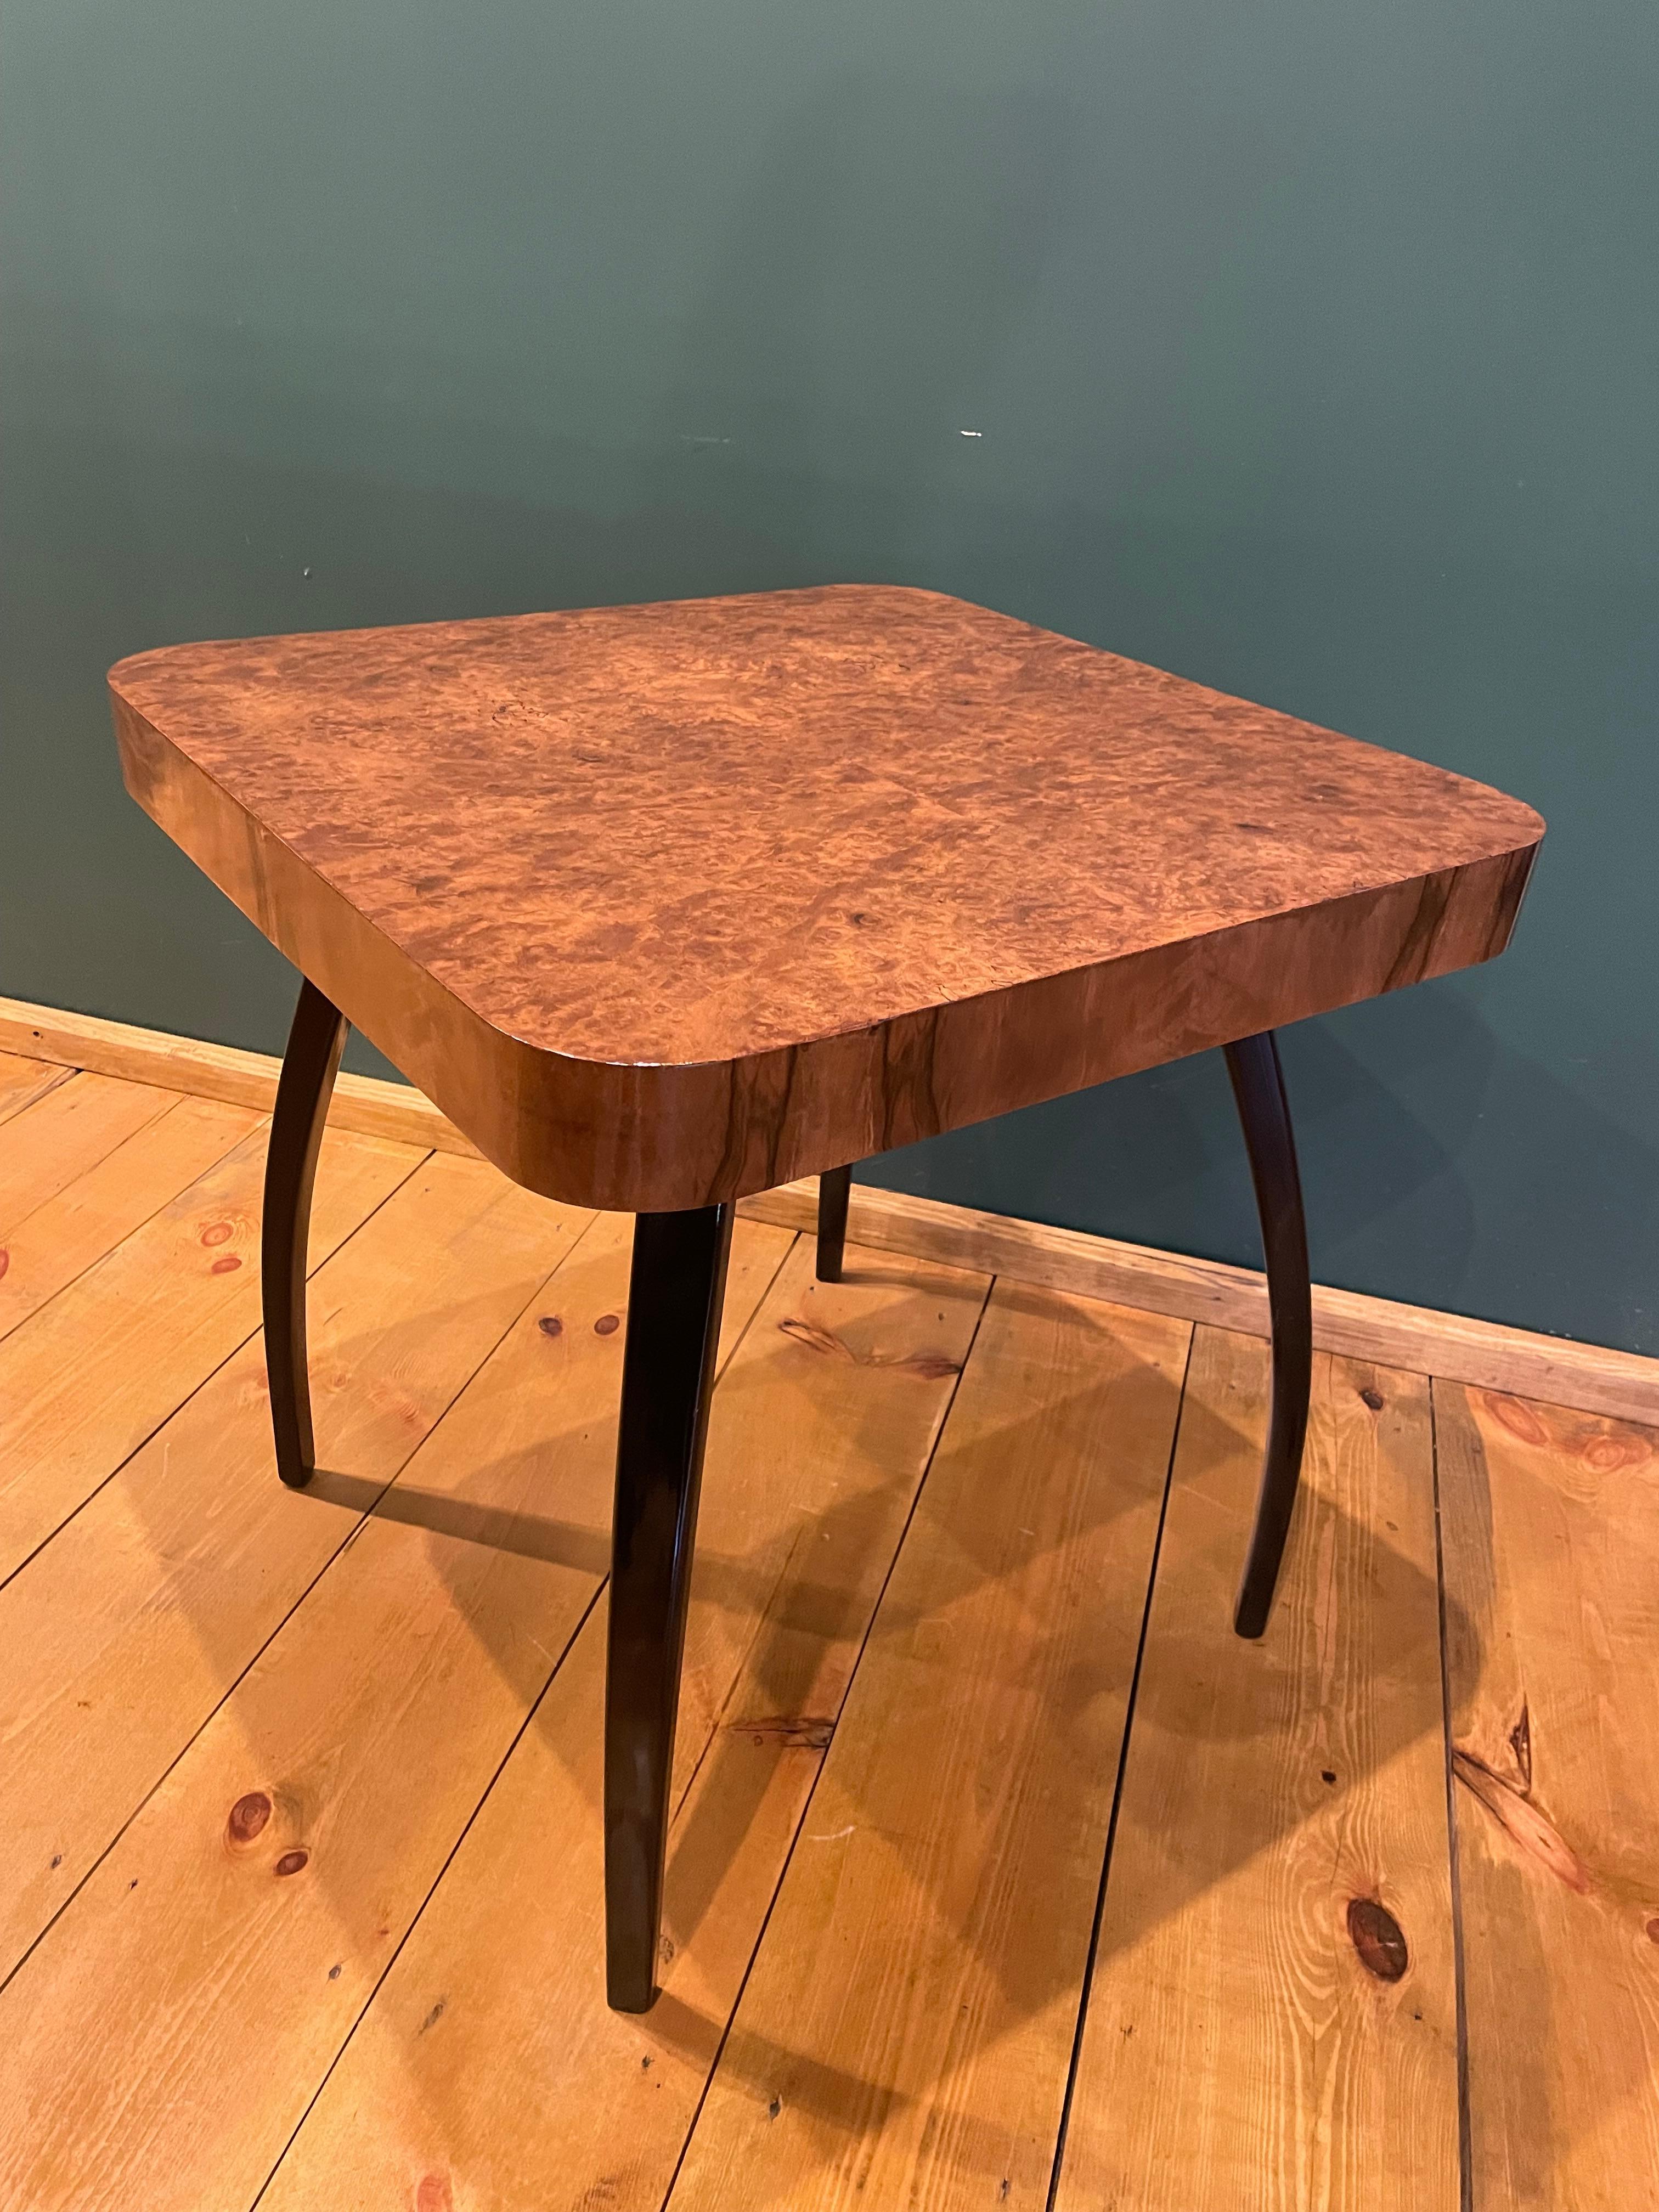 Art Deco table by J. Halabala from 1960s.
The piece of furniture was made of walnut tree.
Art Deco table by the famous Czech designer J. Halabala, 1950. Jindrich Halabala - (a Czech designer ranked among the most outstanding creators of the modern